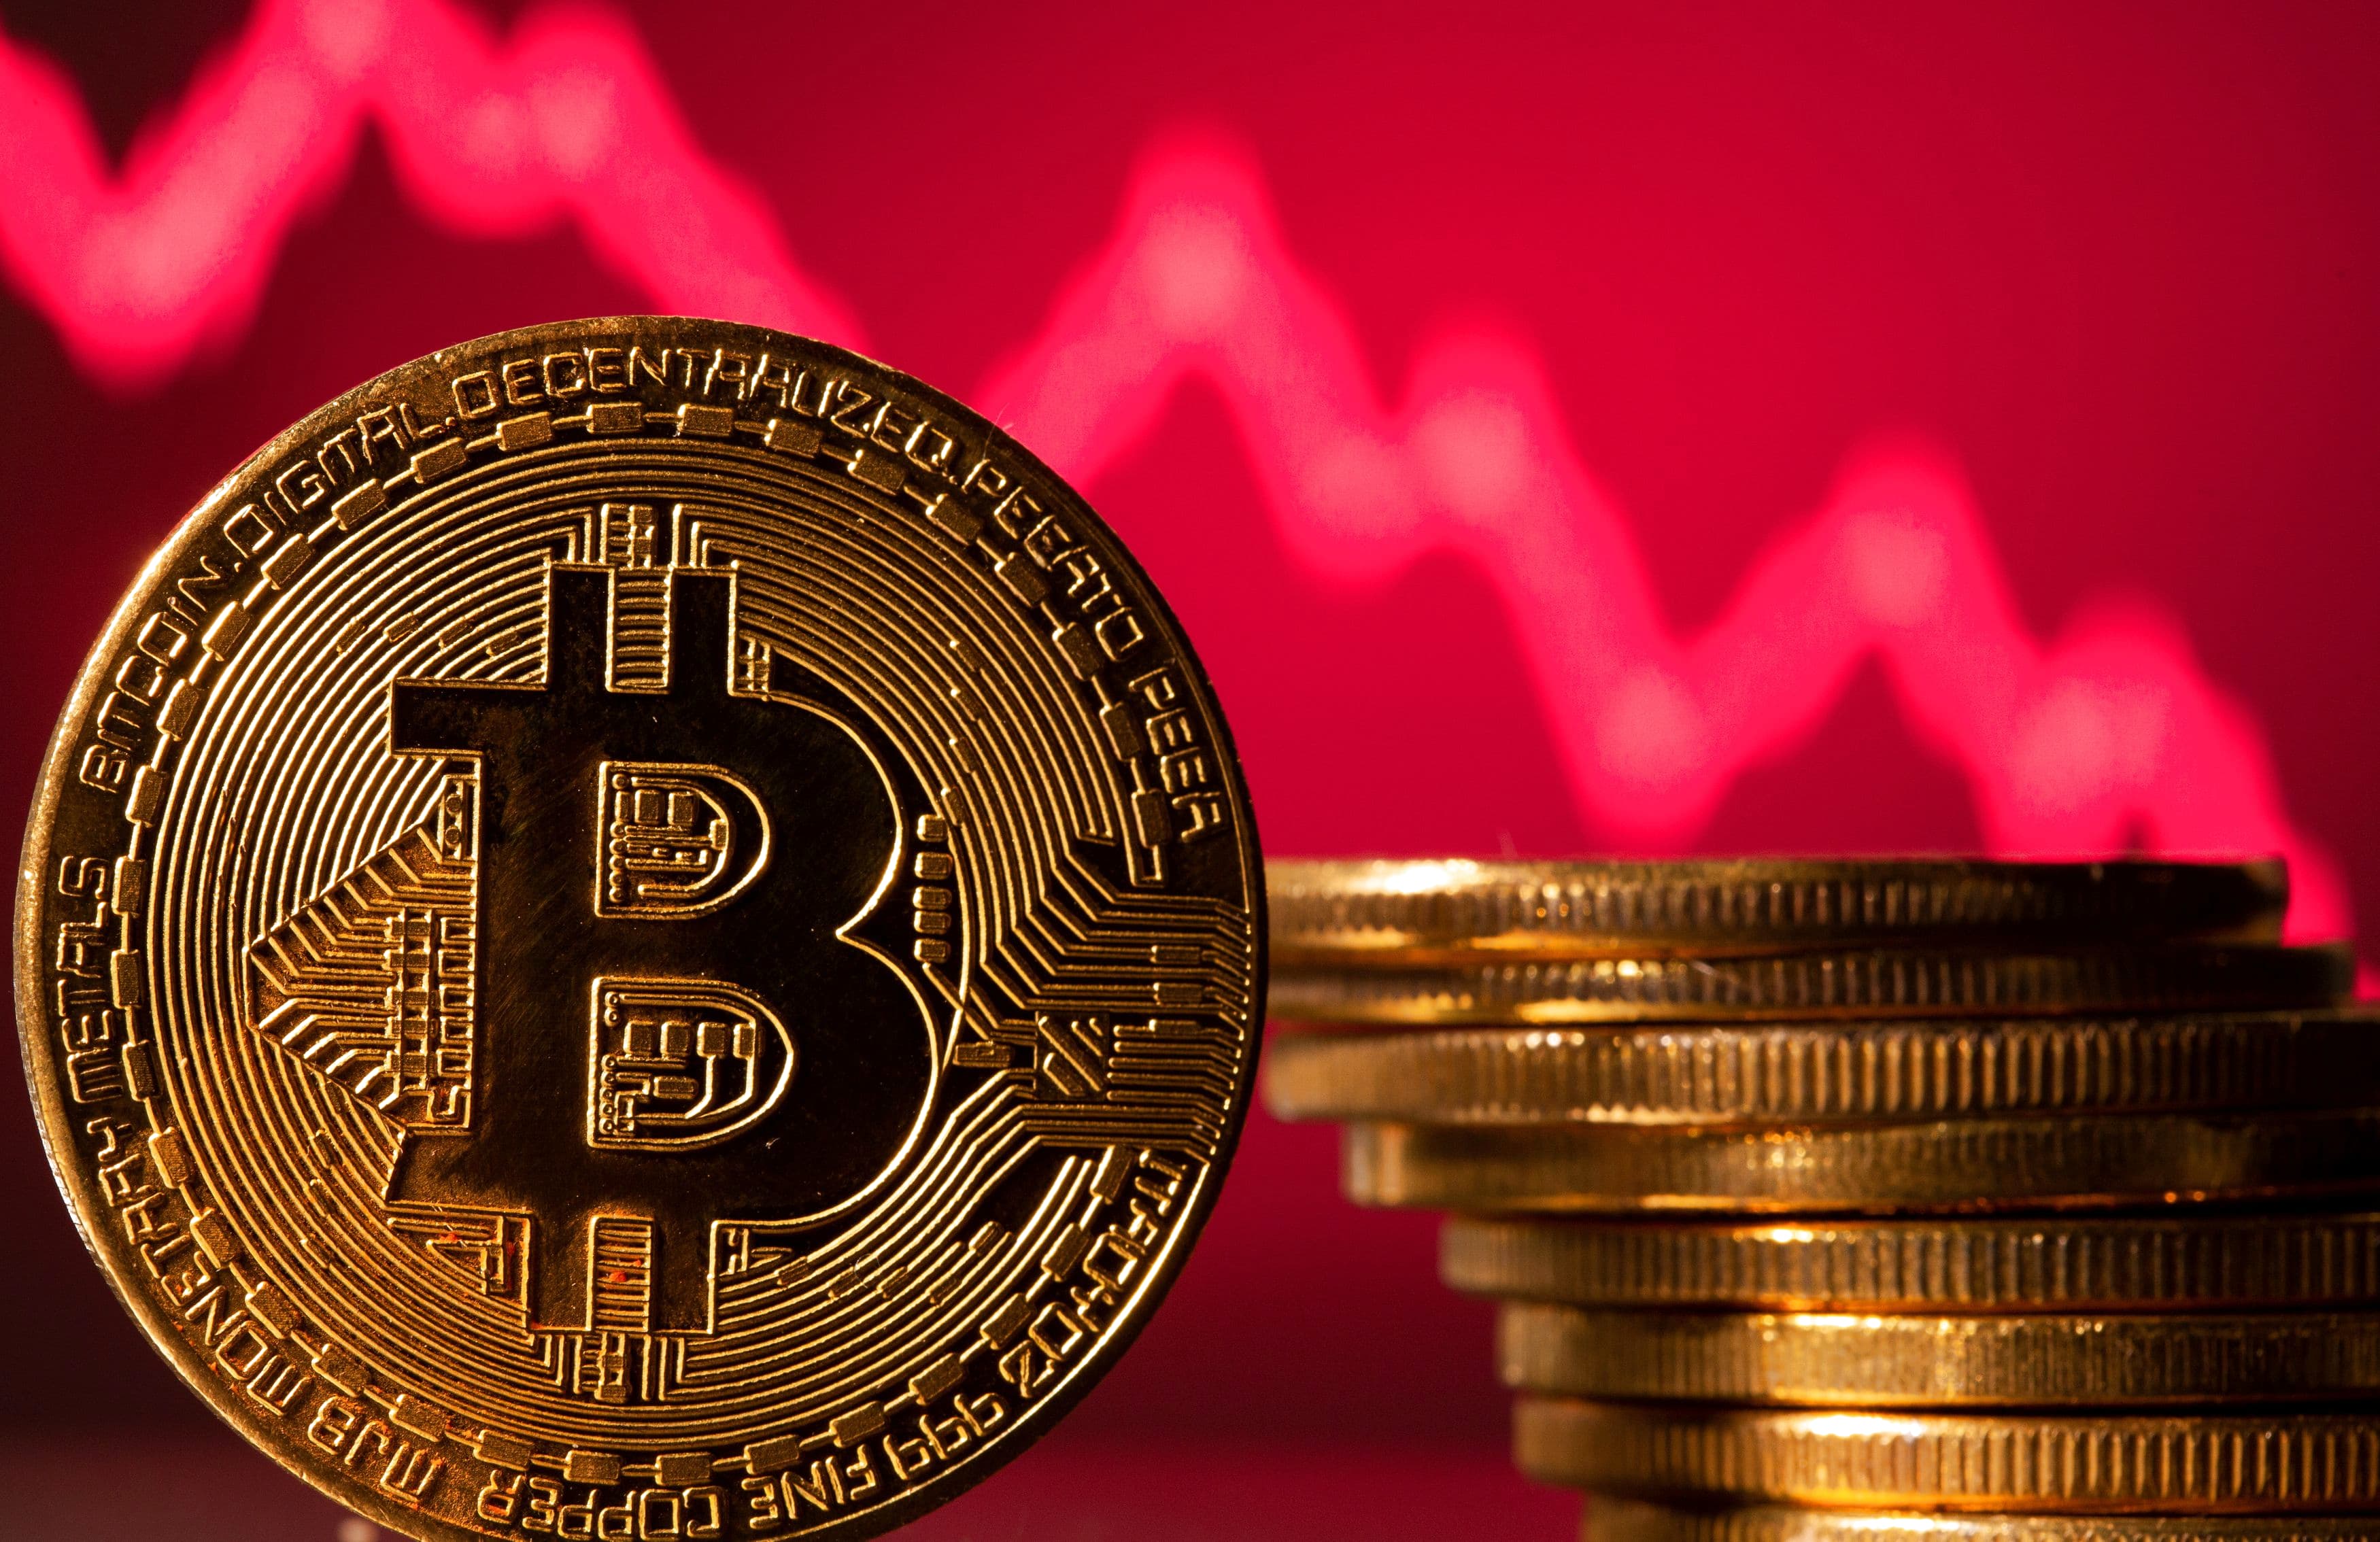 Bitcoin (BTC) falls below $30,000 as cryptocurrency market plunges